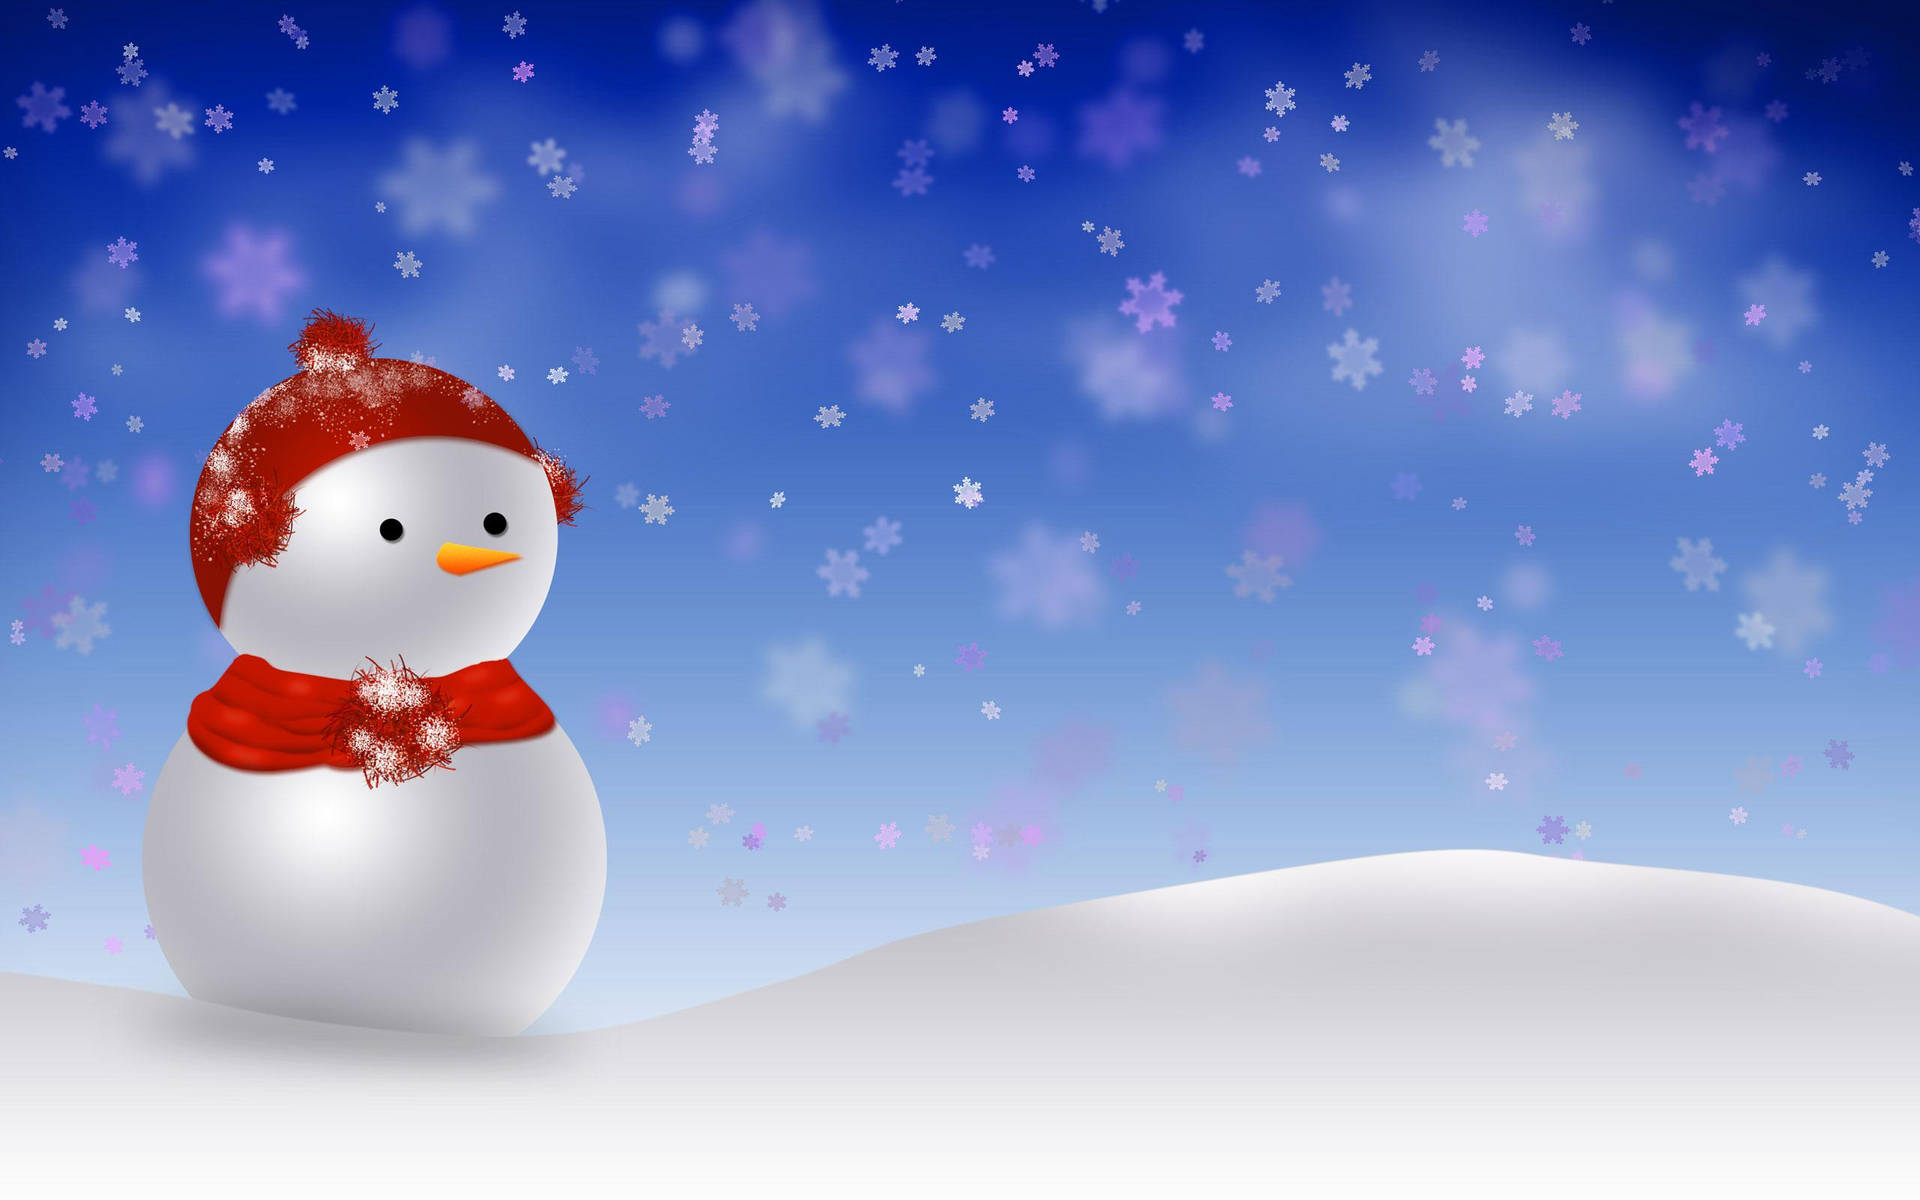 Little Snowman Posing For A Picture Wallpaper